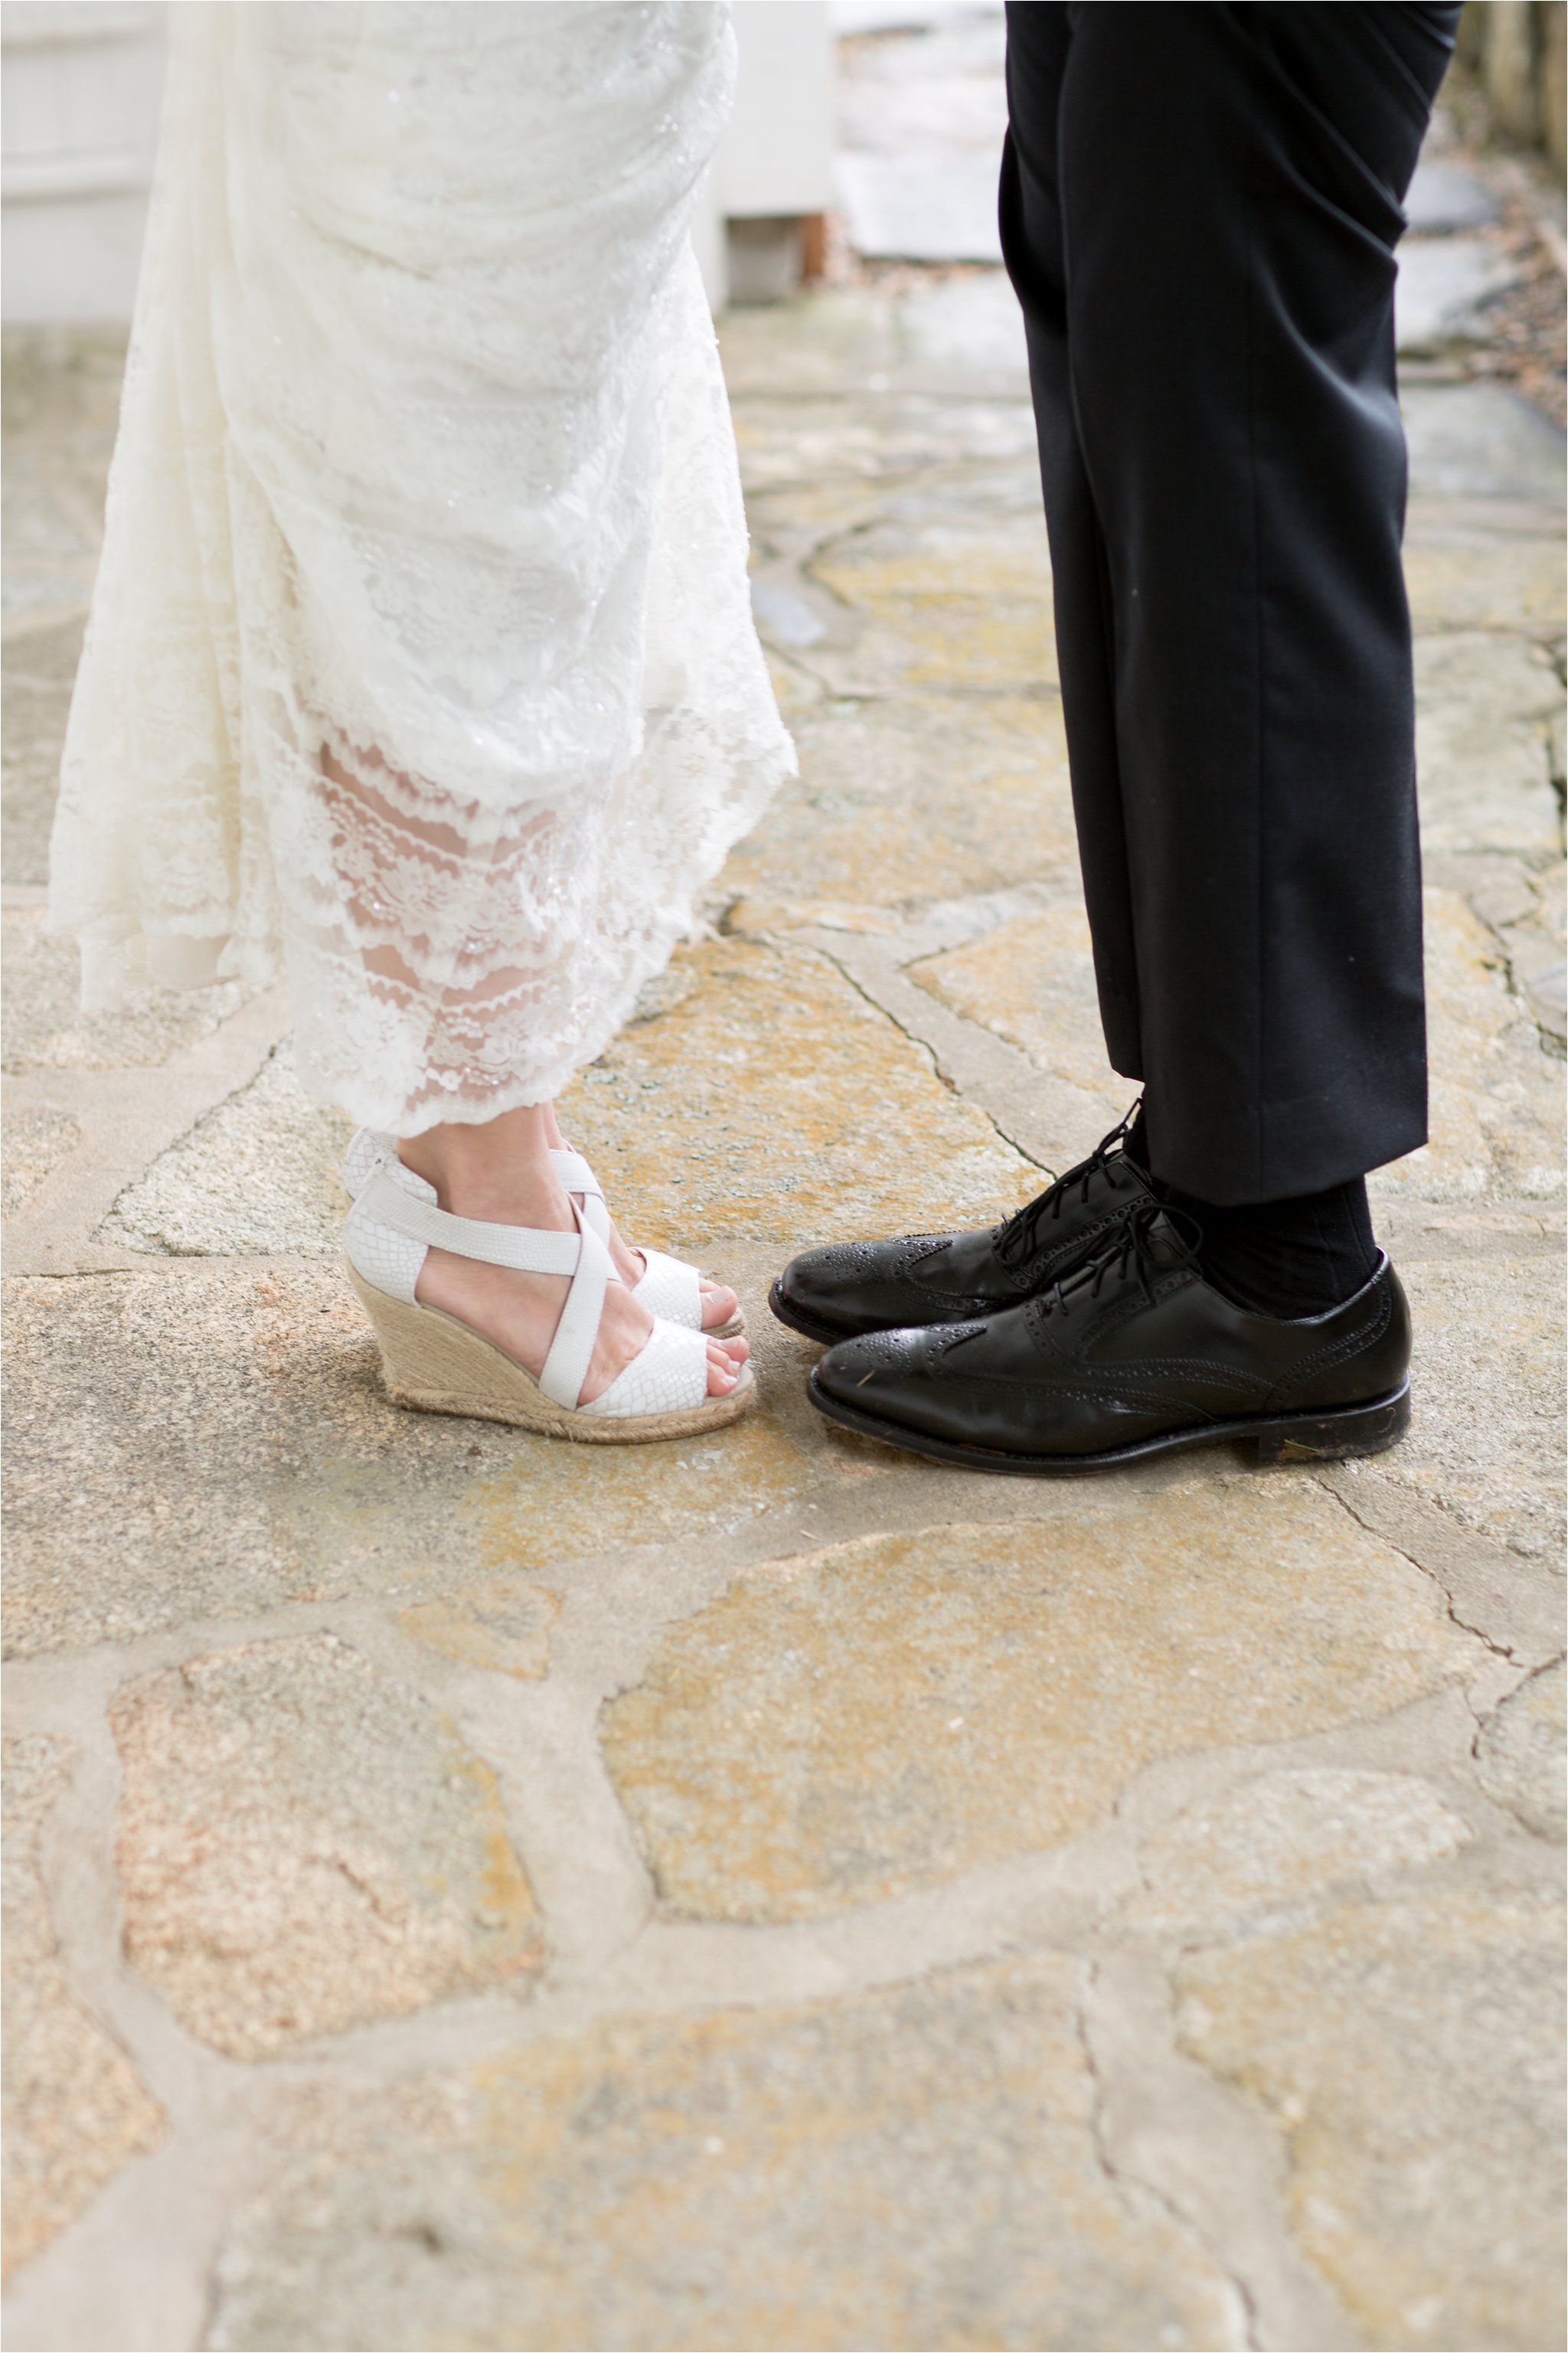 Shoes of Bride and Groom (C) Maundy Mitchell